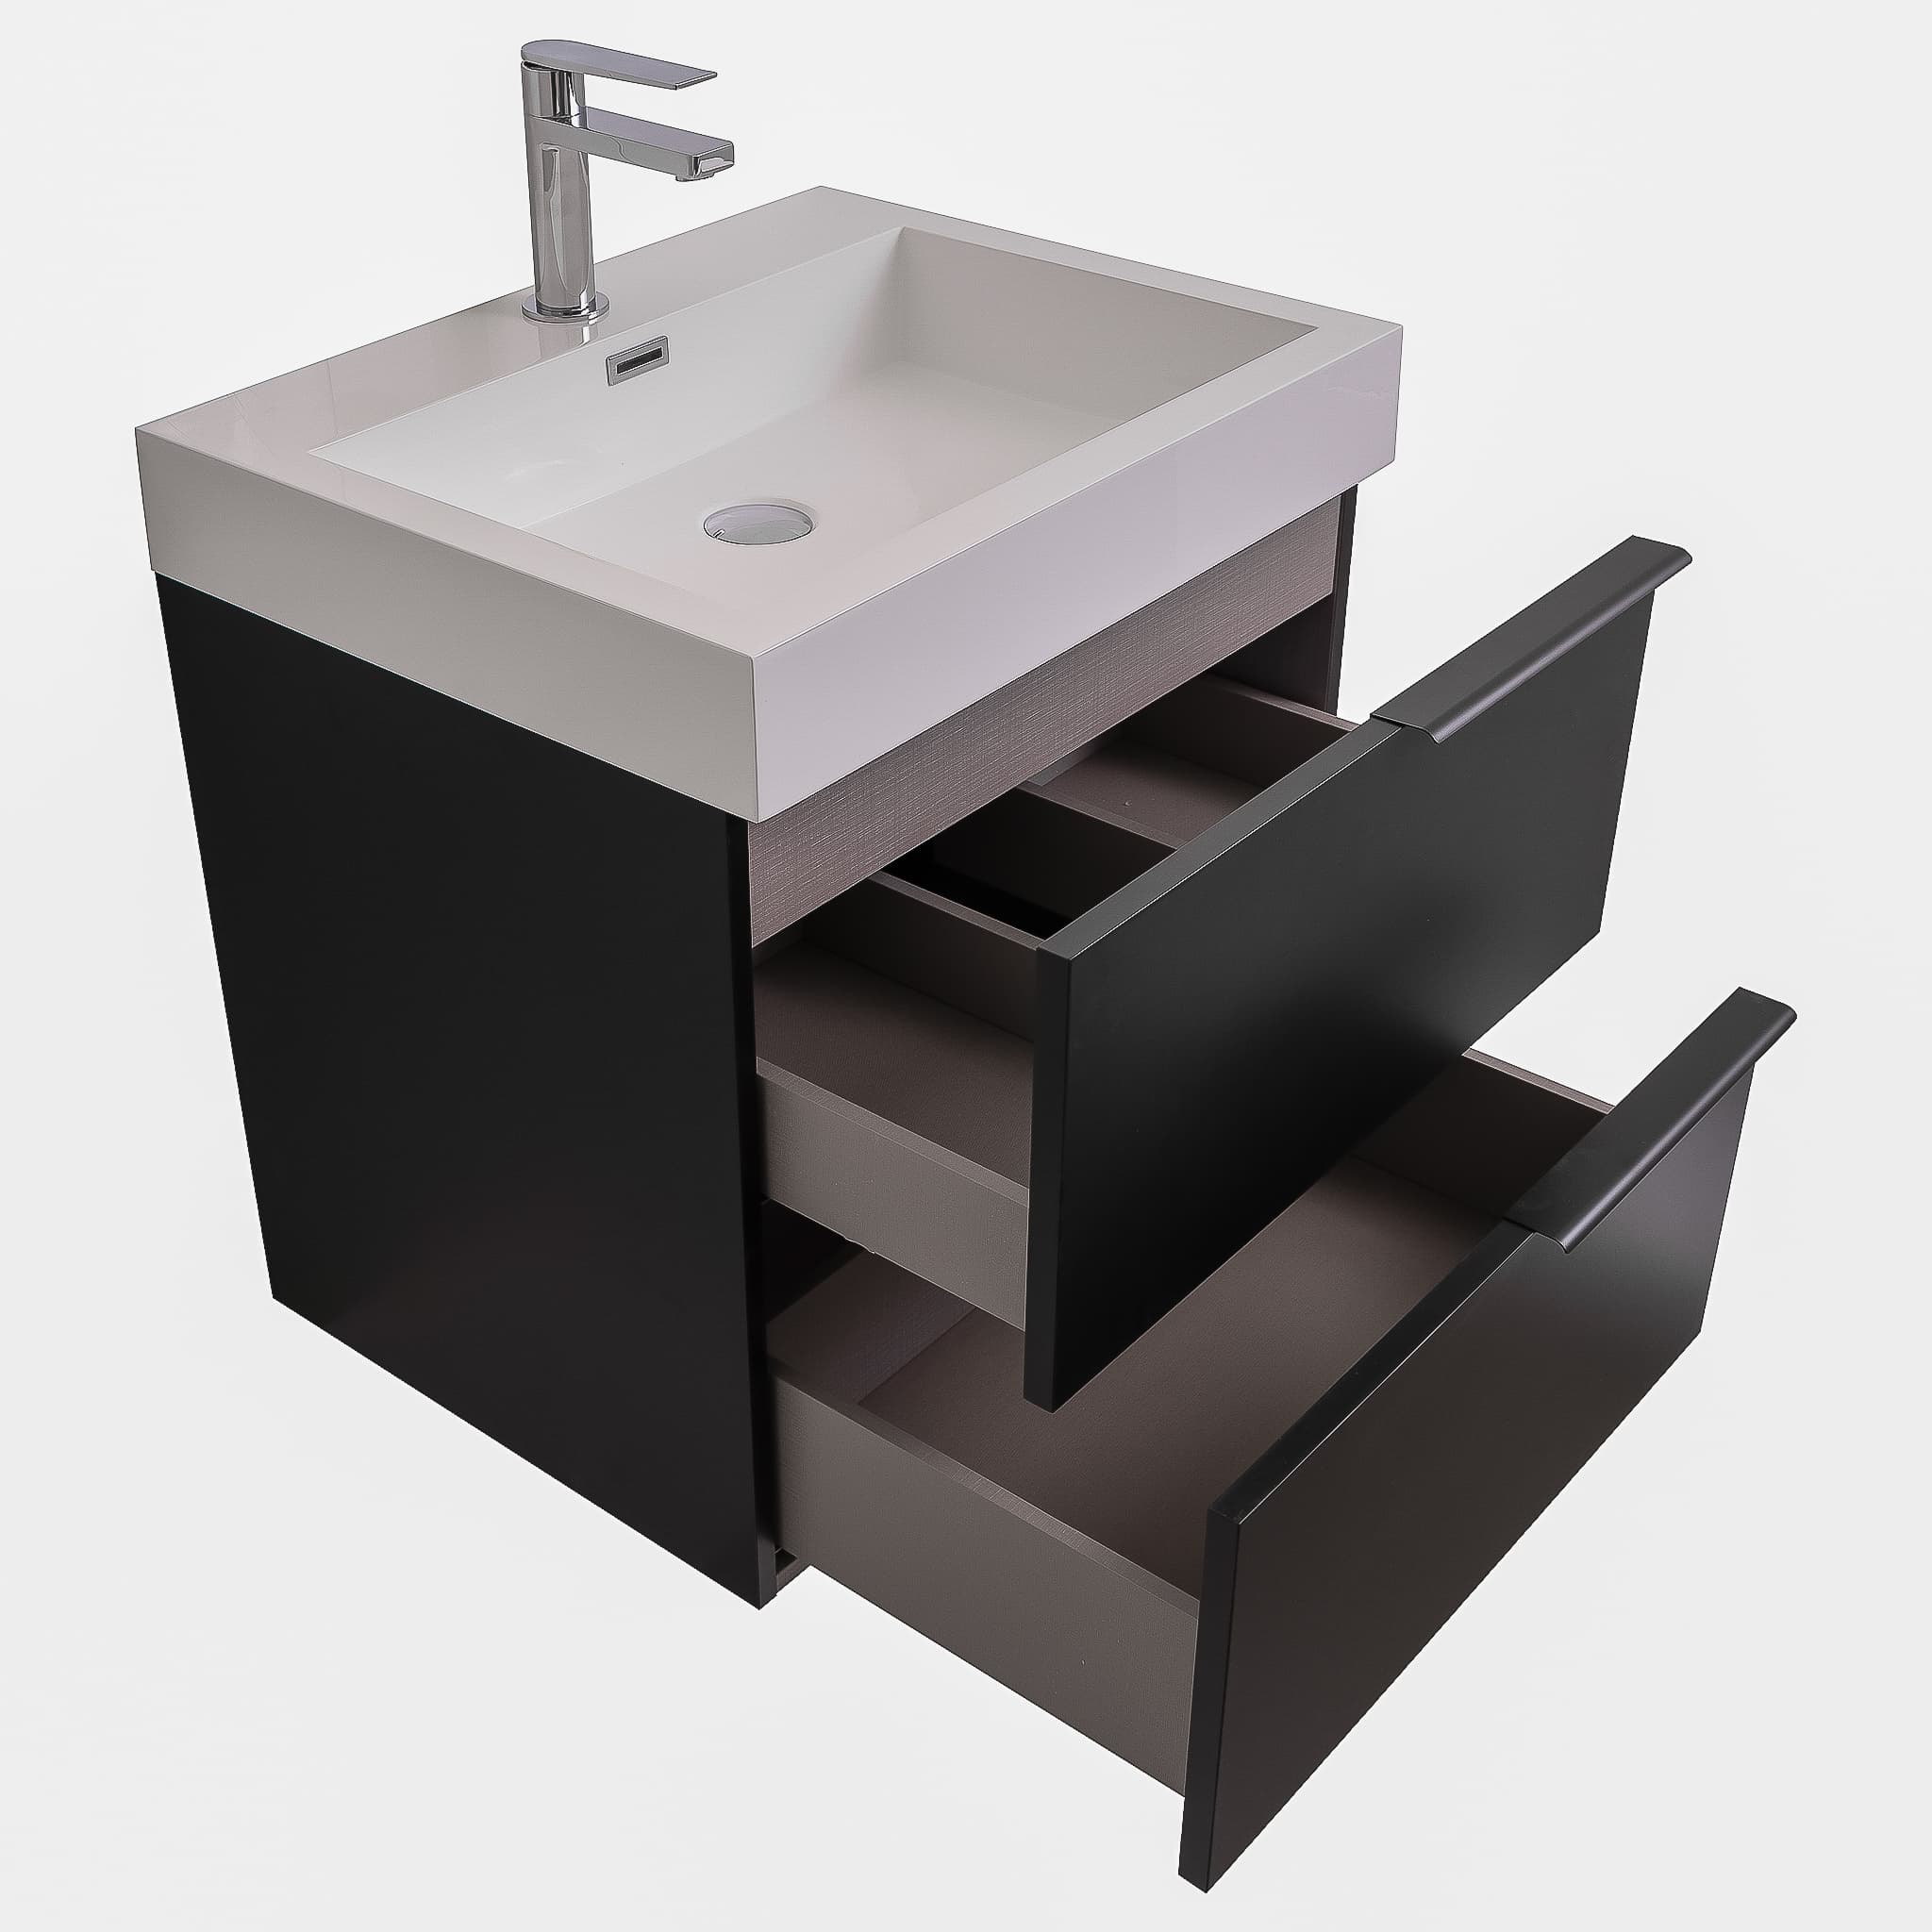 Mallorca 23.5 Matte Black Cabinet, Square Cultured Marble Sink, Wall Mounted Modern Vanity Set